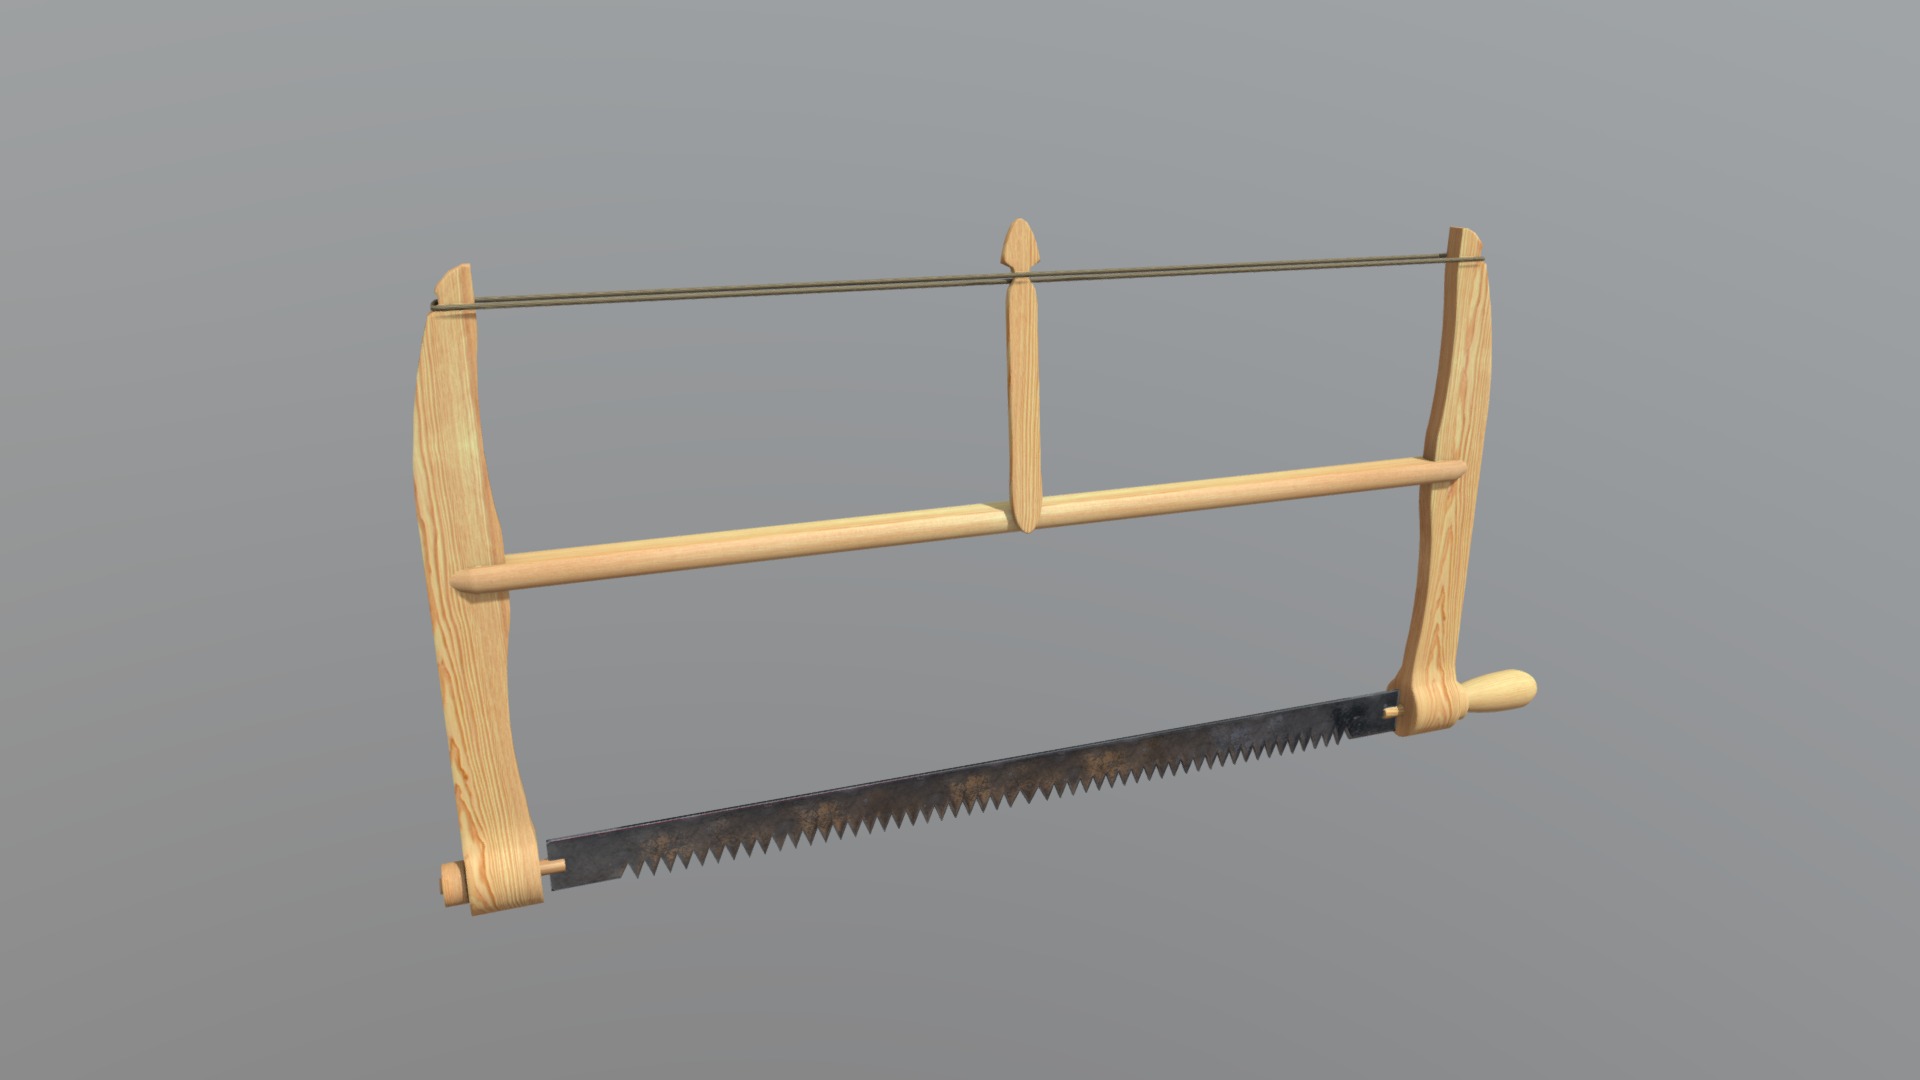 3D model Frame Saw - This is a 3D model of the Frame Saw. The 3D model is about a wooden chair with a black frame.